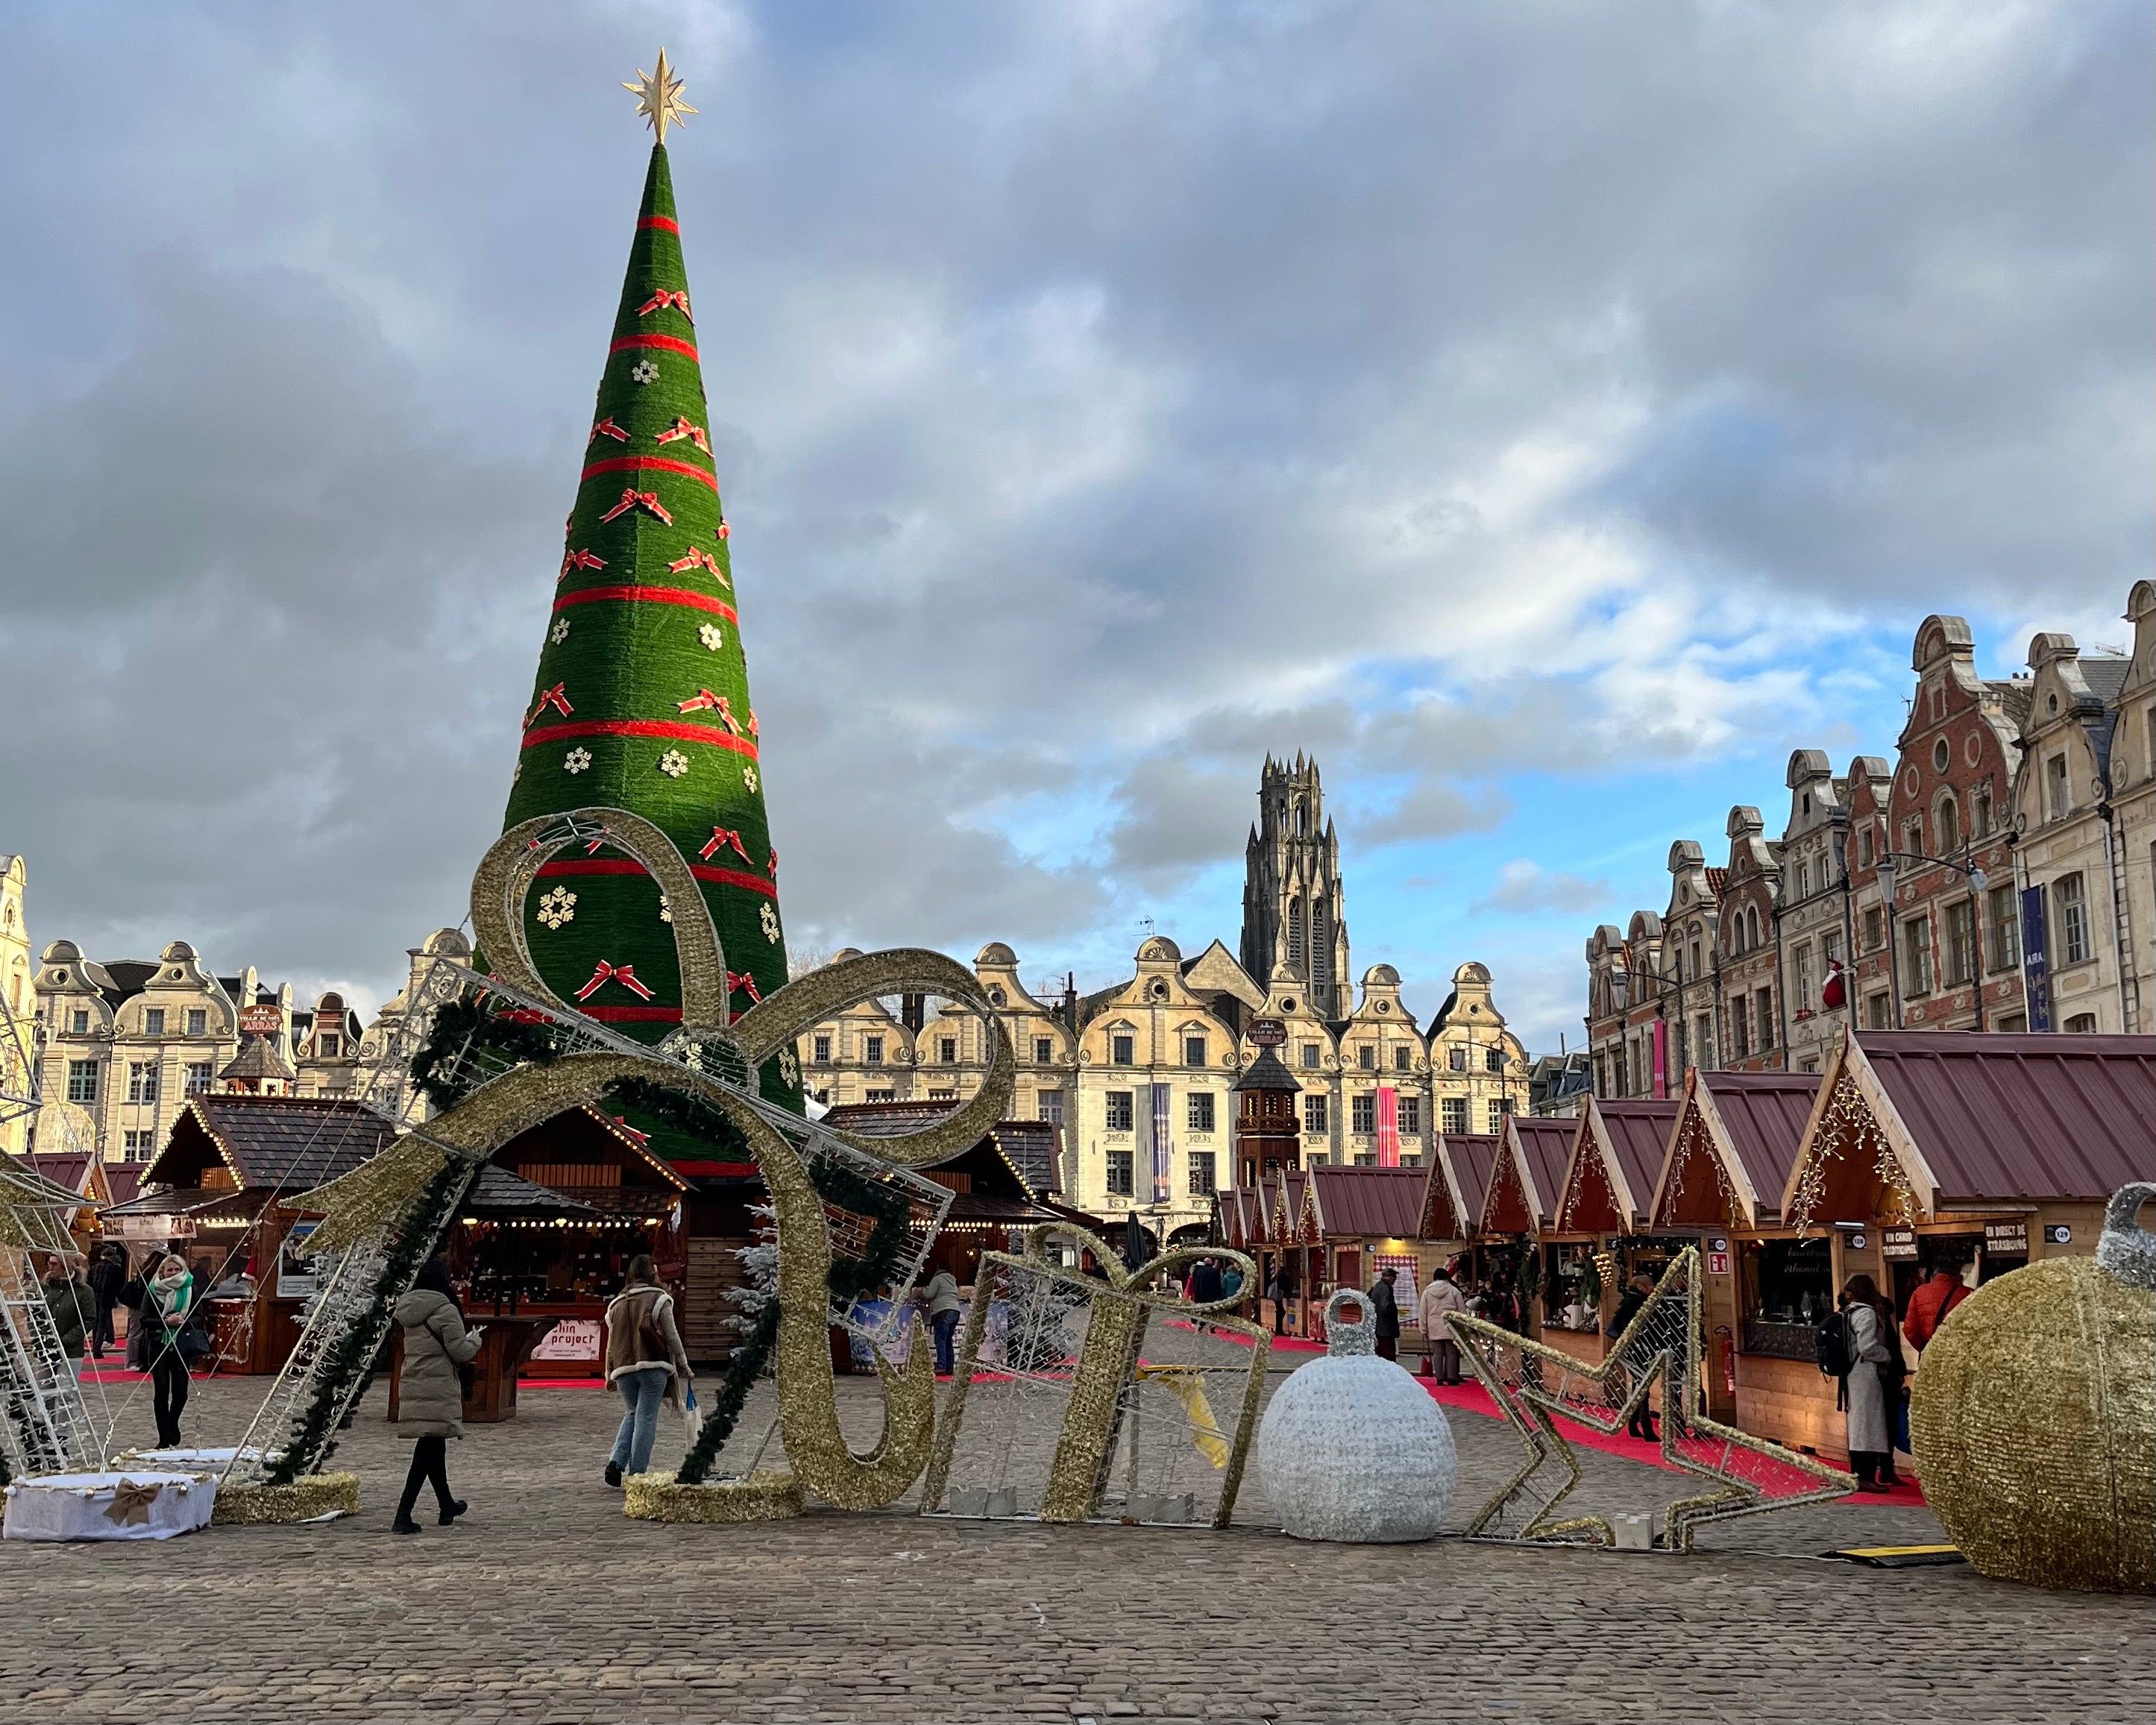 Arras has a bigger Christmas market than Lille, but fewer crowds